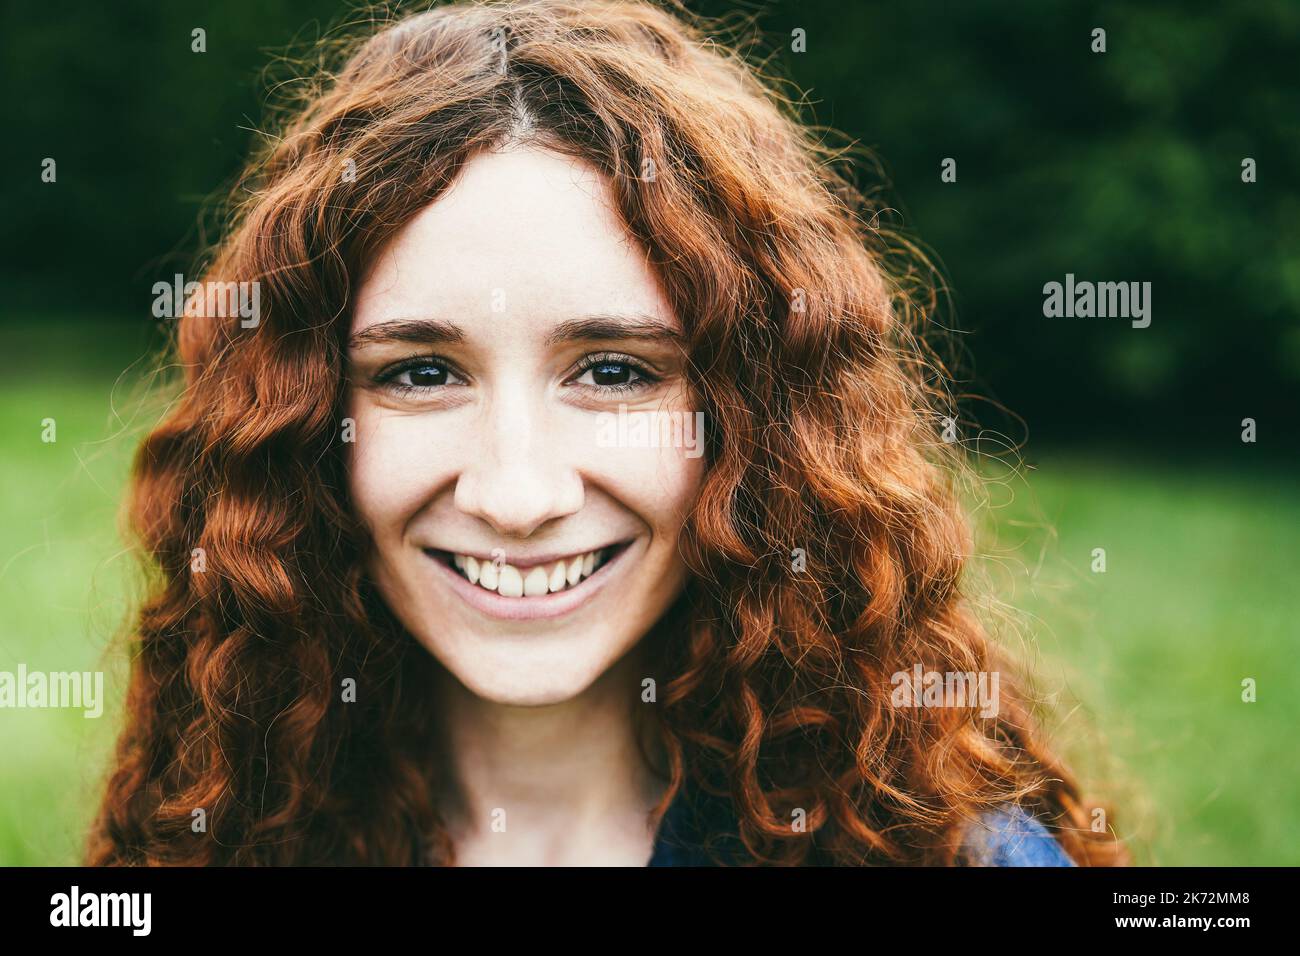 Happy read hair girl smiling on camera outdoor - Focus on face Stock Photo